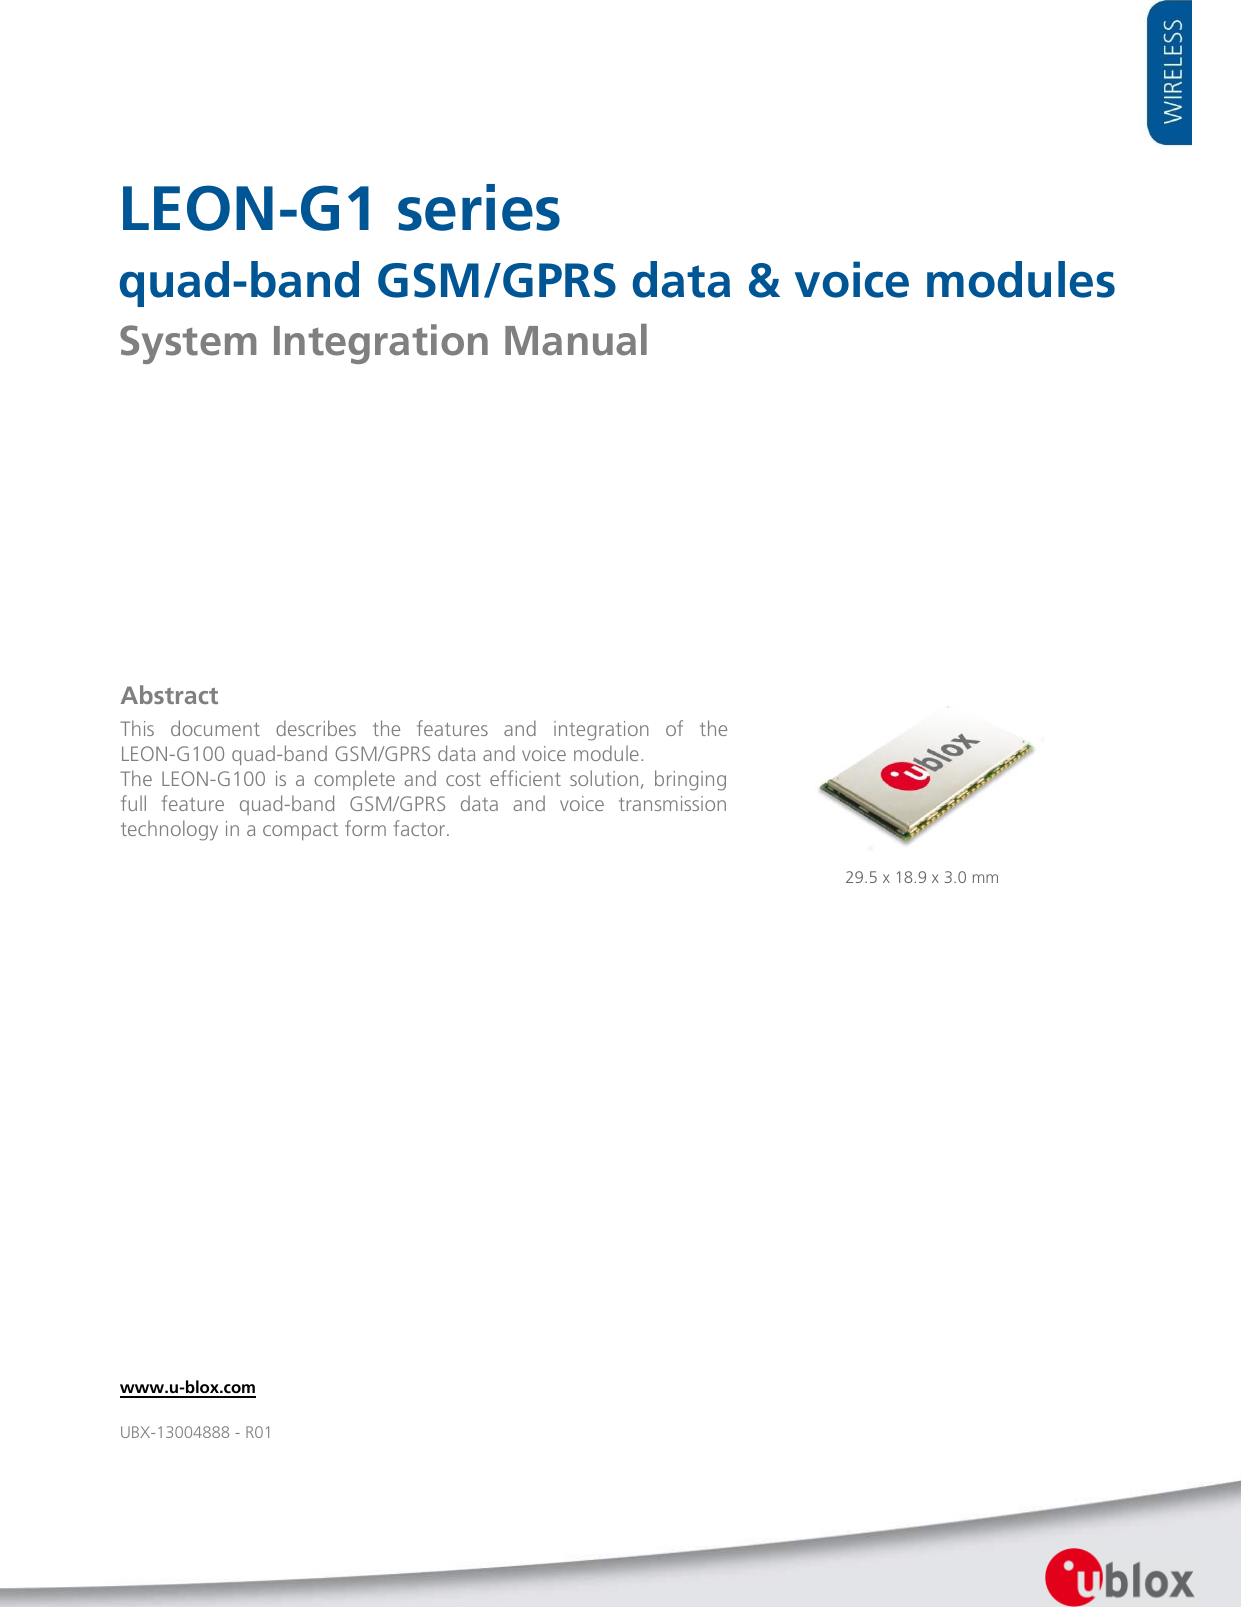     LEON-G1 series quad-band GSM/GPRS data &amp; voice modules System Integration Manual            29.5 x 18.9 x 3.0 mm Abstract This  document  describes  the  features  and  integration  of  the LEON-G100 quad-band GSM/GPRS data and voice module. The  LEON-G100  is a complete and cost efficient  solution, bringing full  feature  quad-band  GSM/GPRS  data  and  voice  transmission technology in a compact form factor.  www.u-blox.com UBX-13004888 - R01 